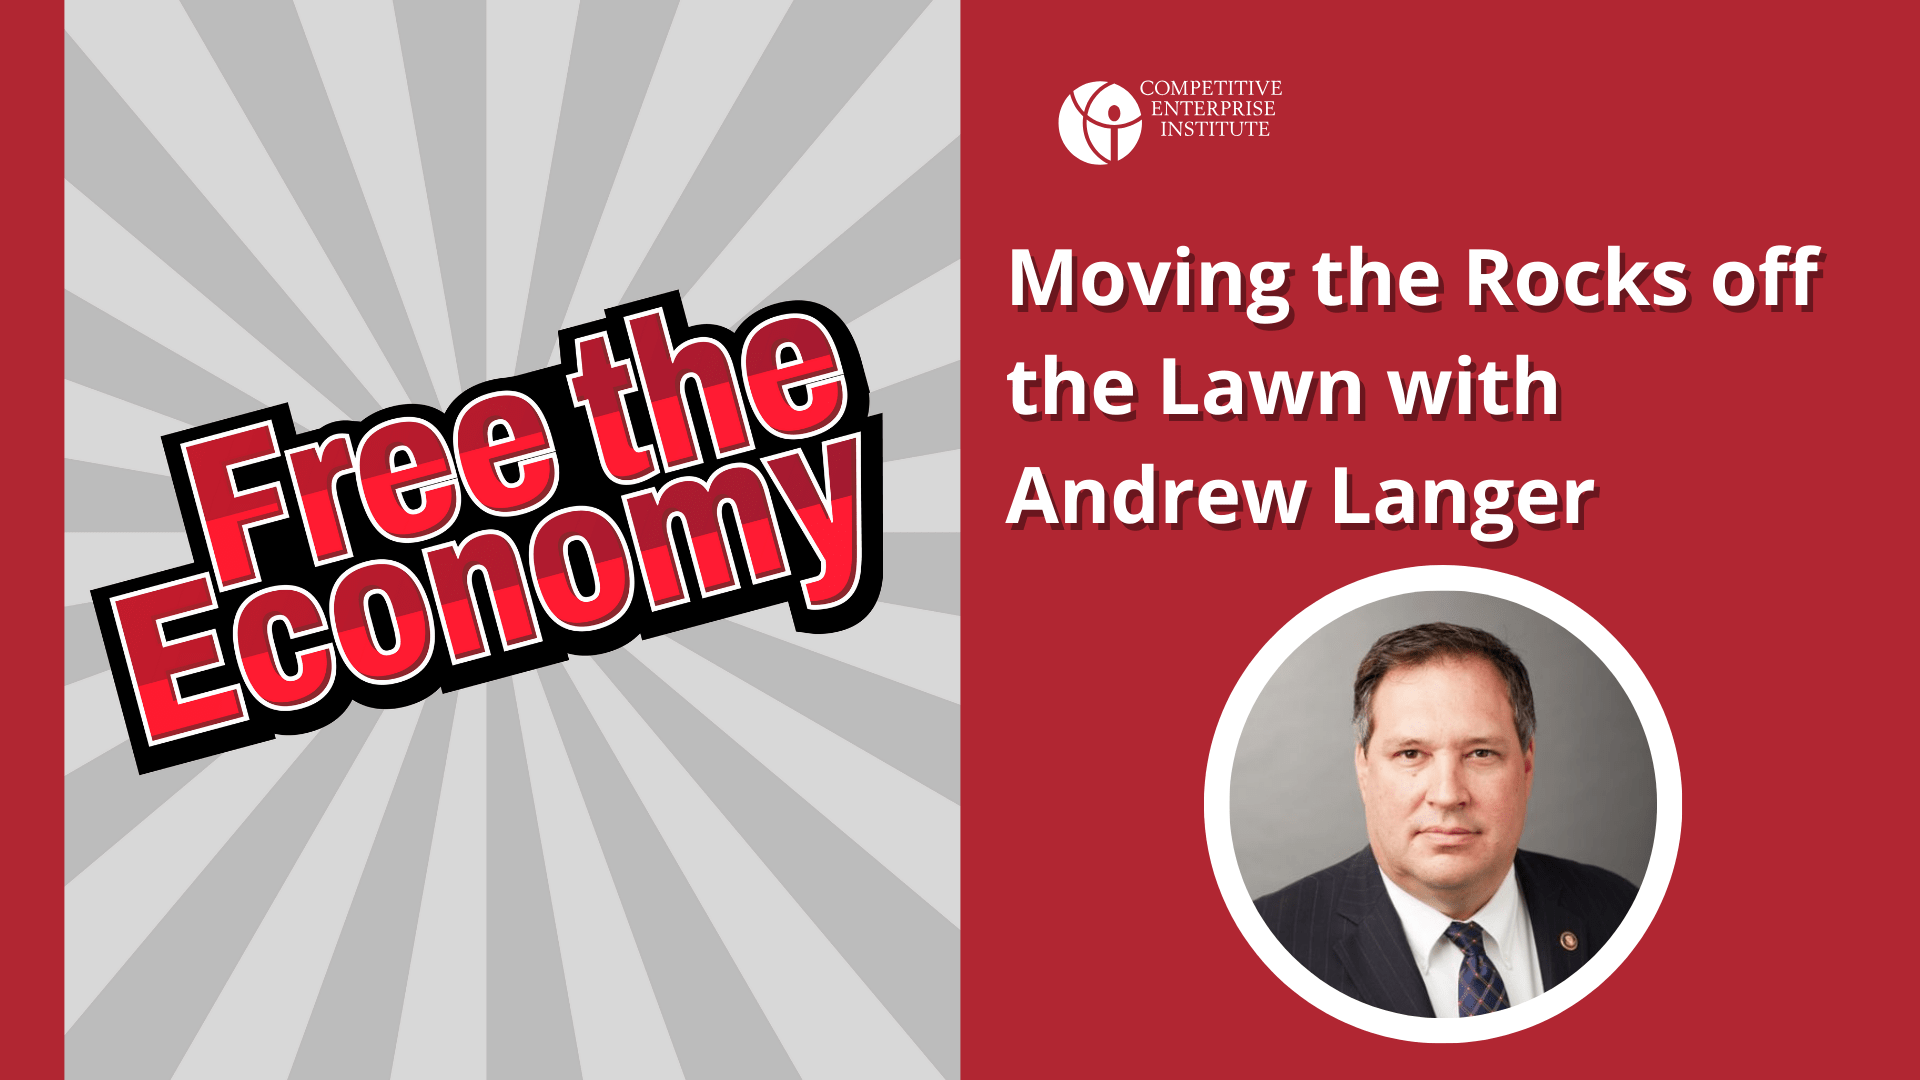 Moving the Rocks off the Lawn with Andrew Langer